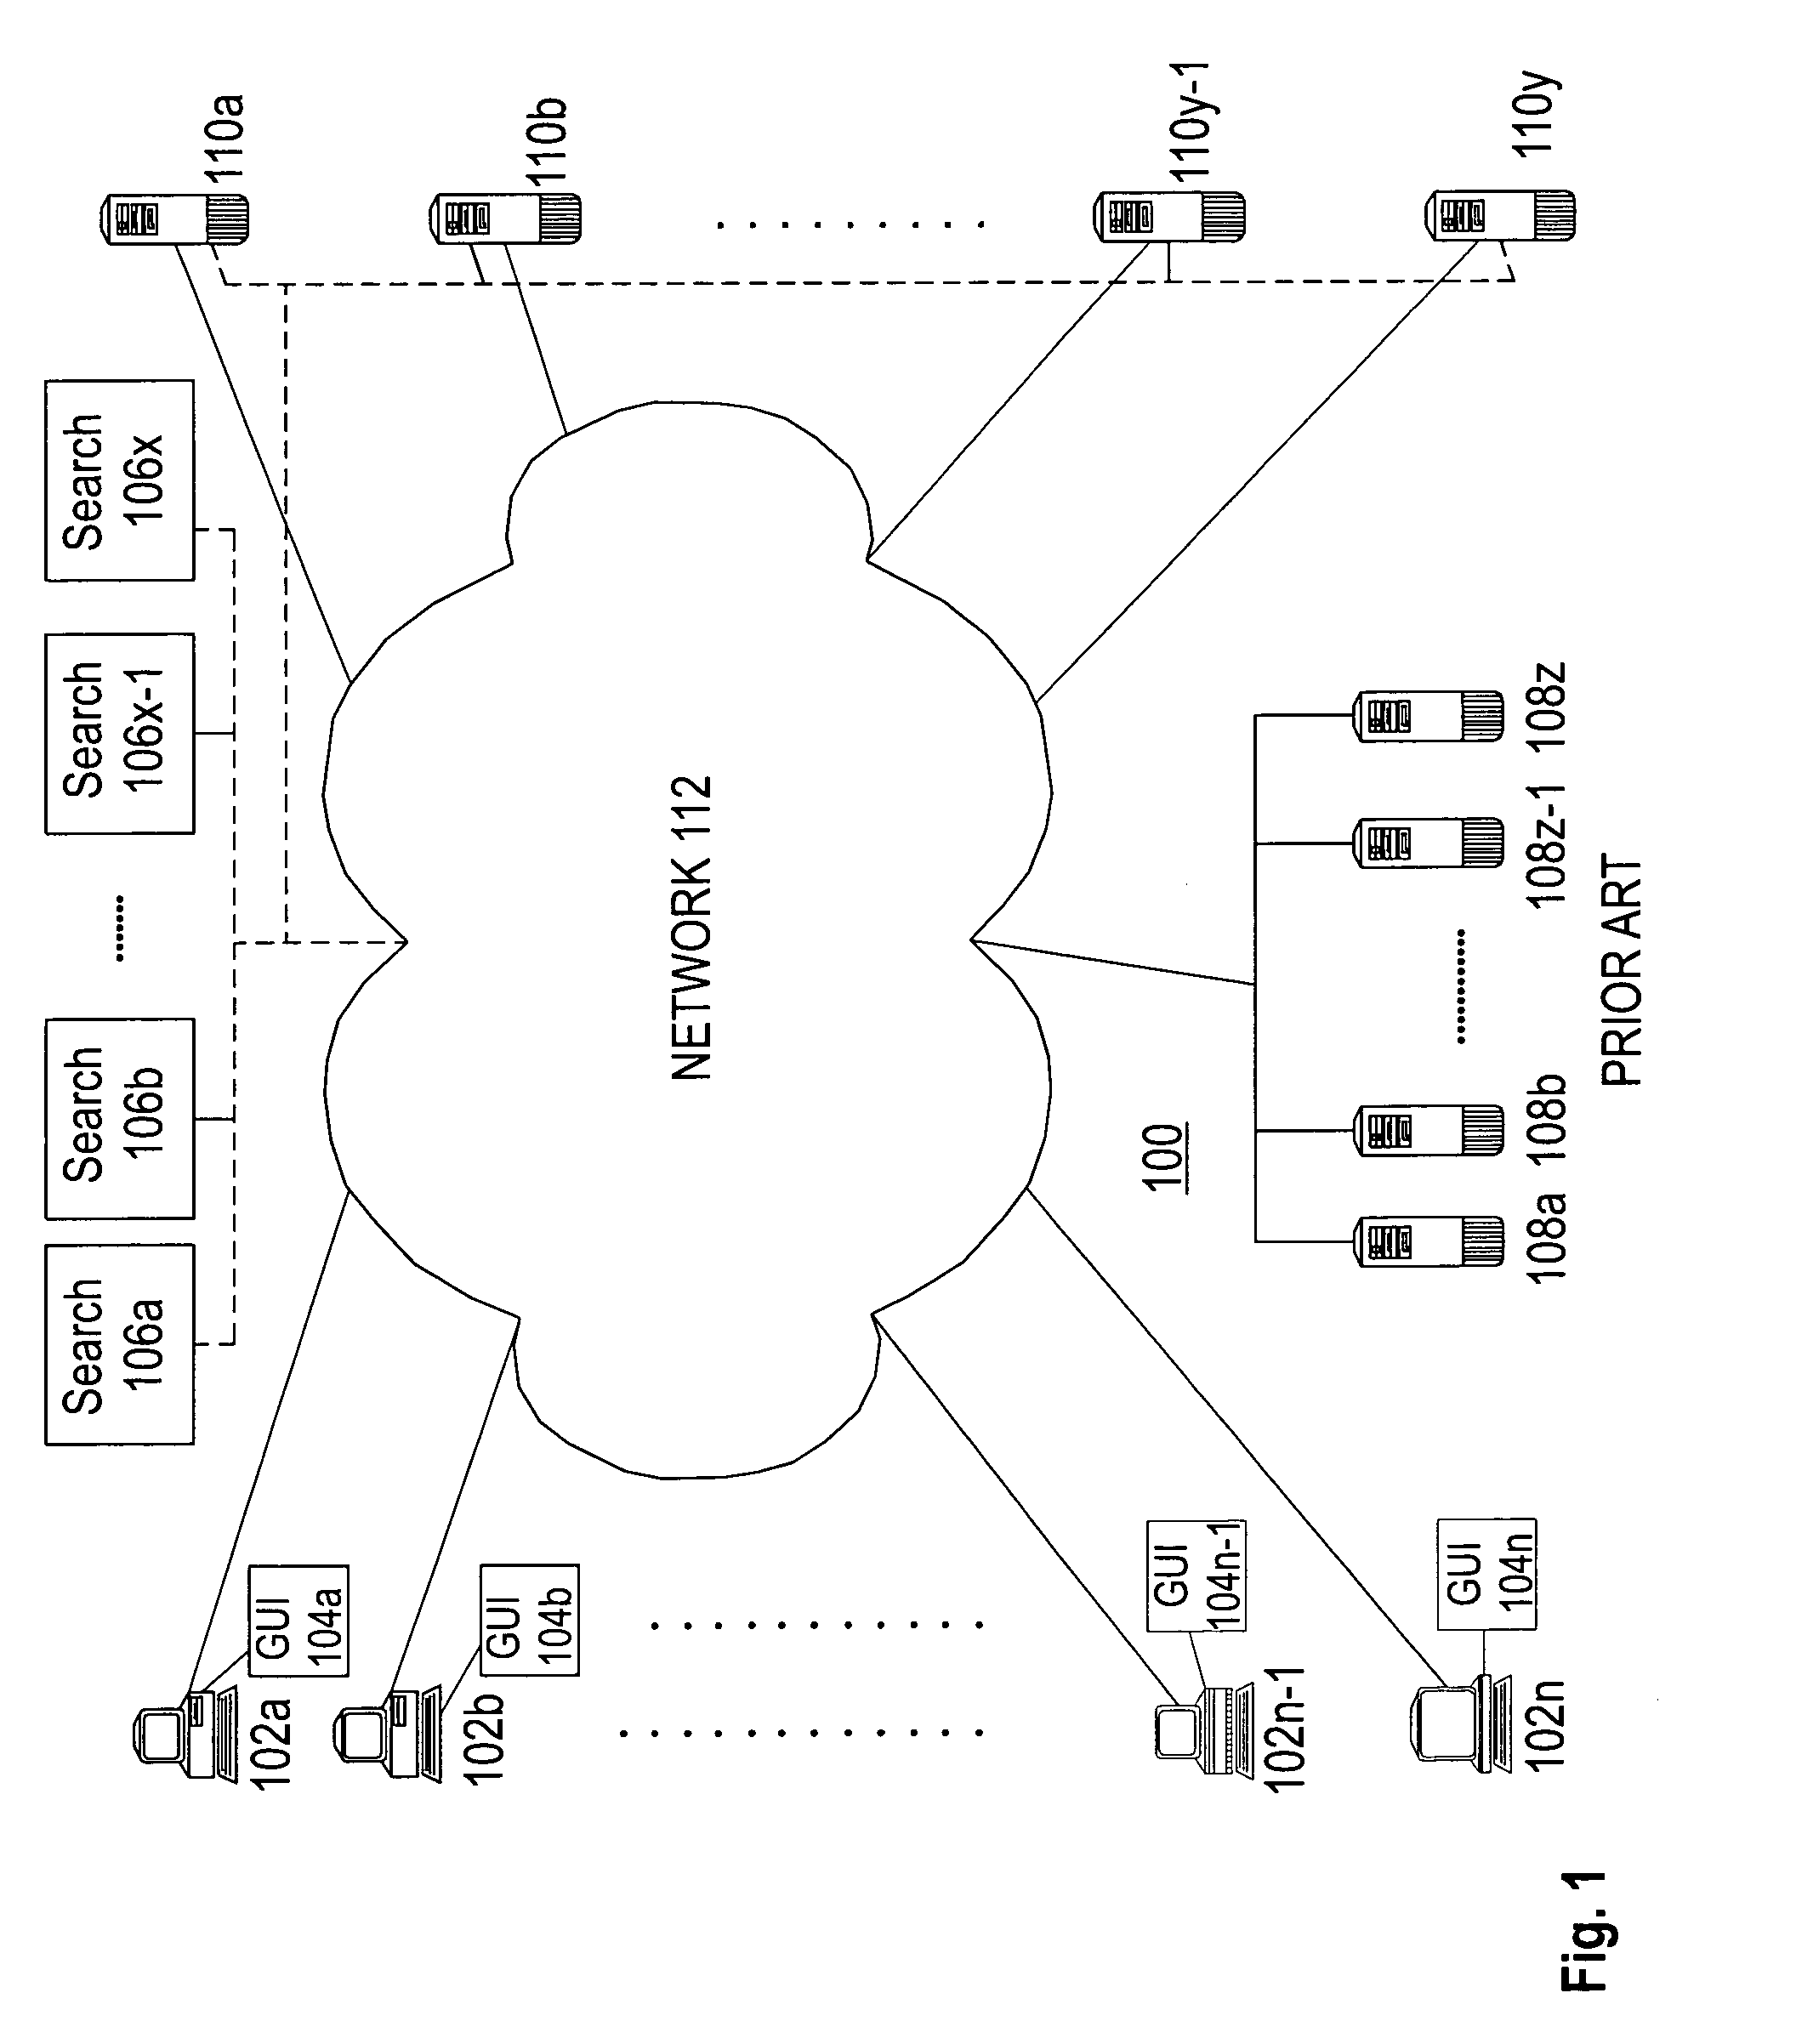 System and method for comparing and representing similarity between documents using a drag and drop GUI within a dynamically generated list of document identifiers